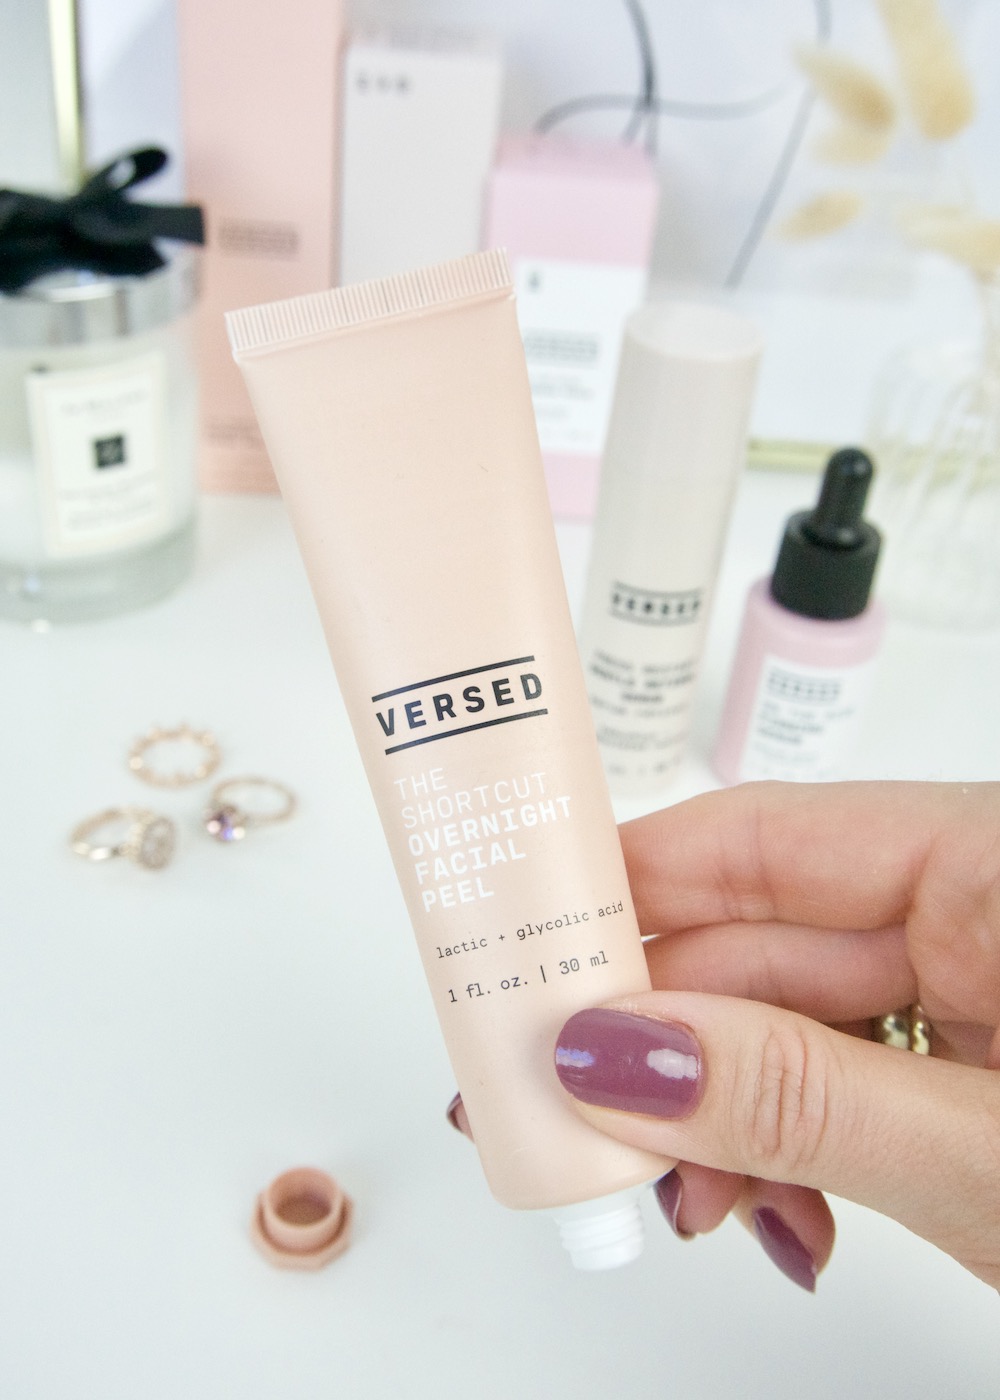 Versed Skincare The Shortcut Overnight Facial Peel in hand